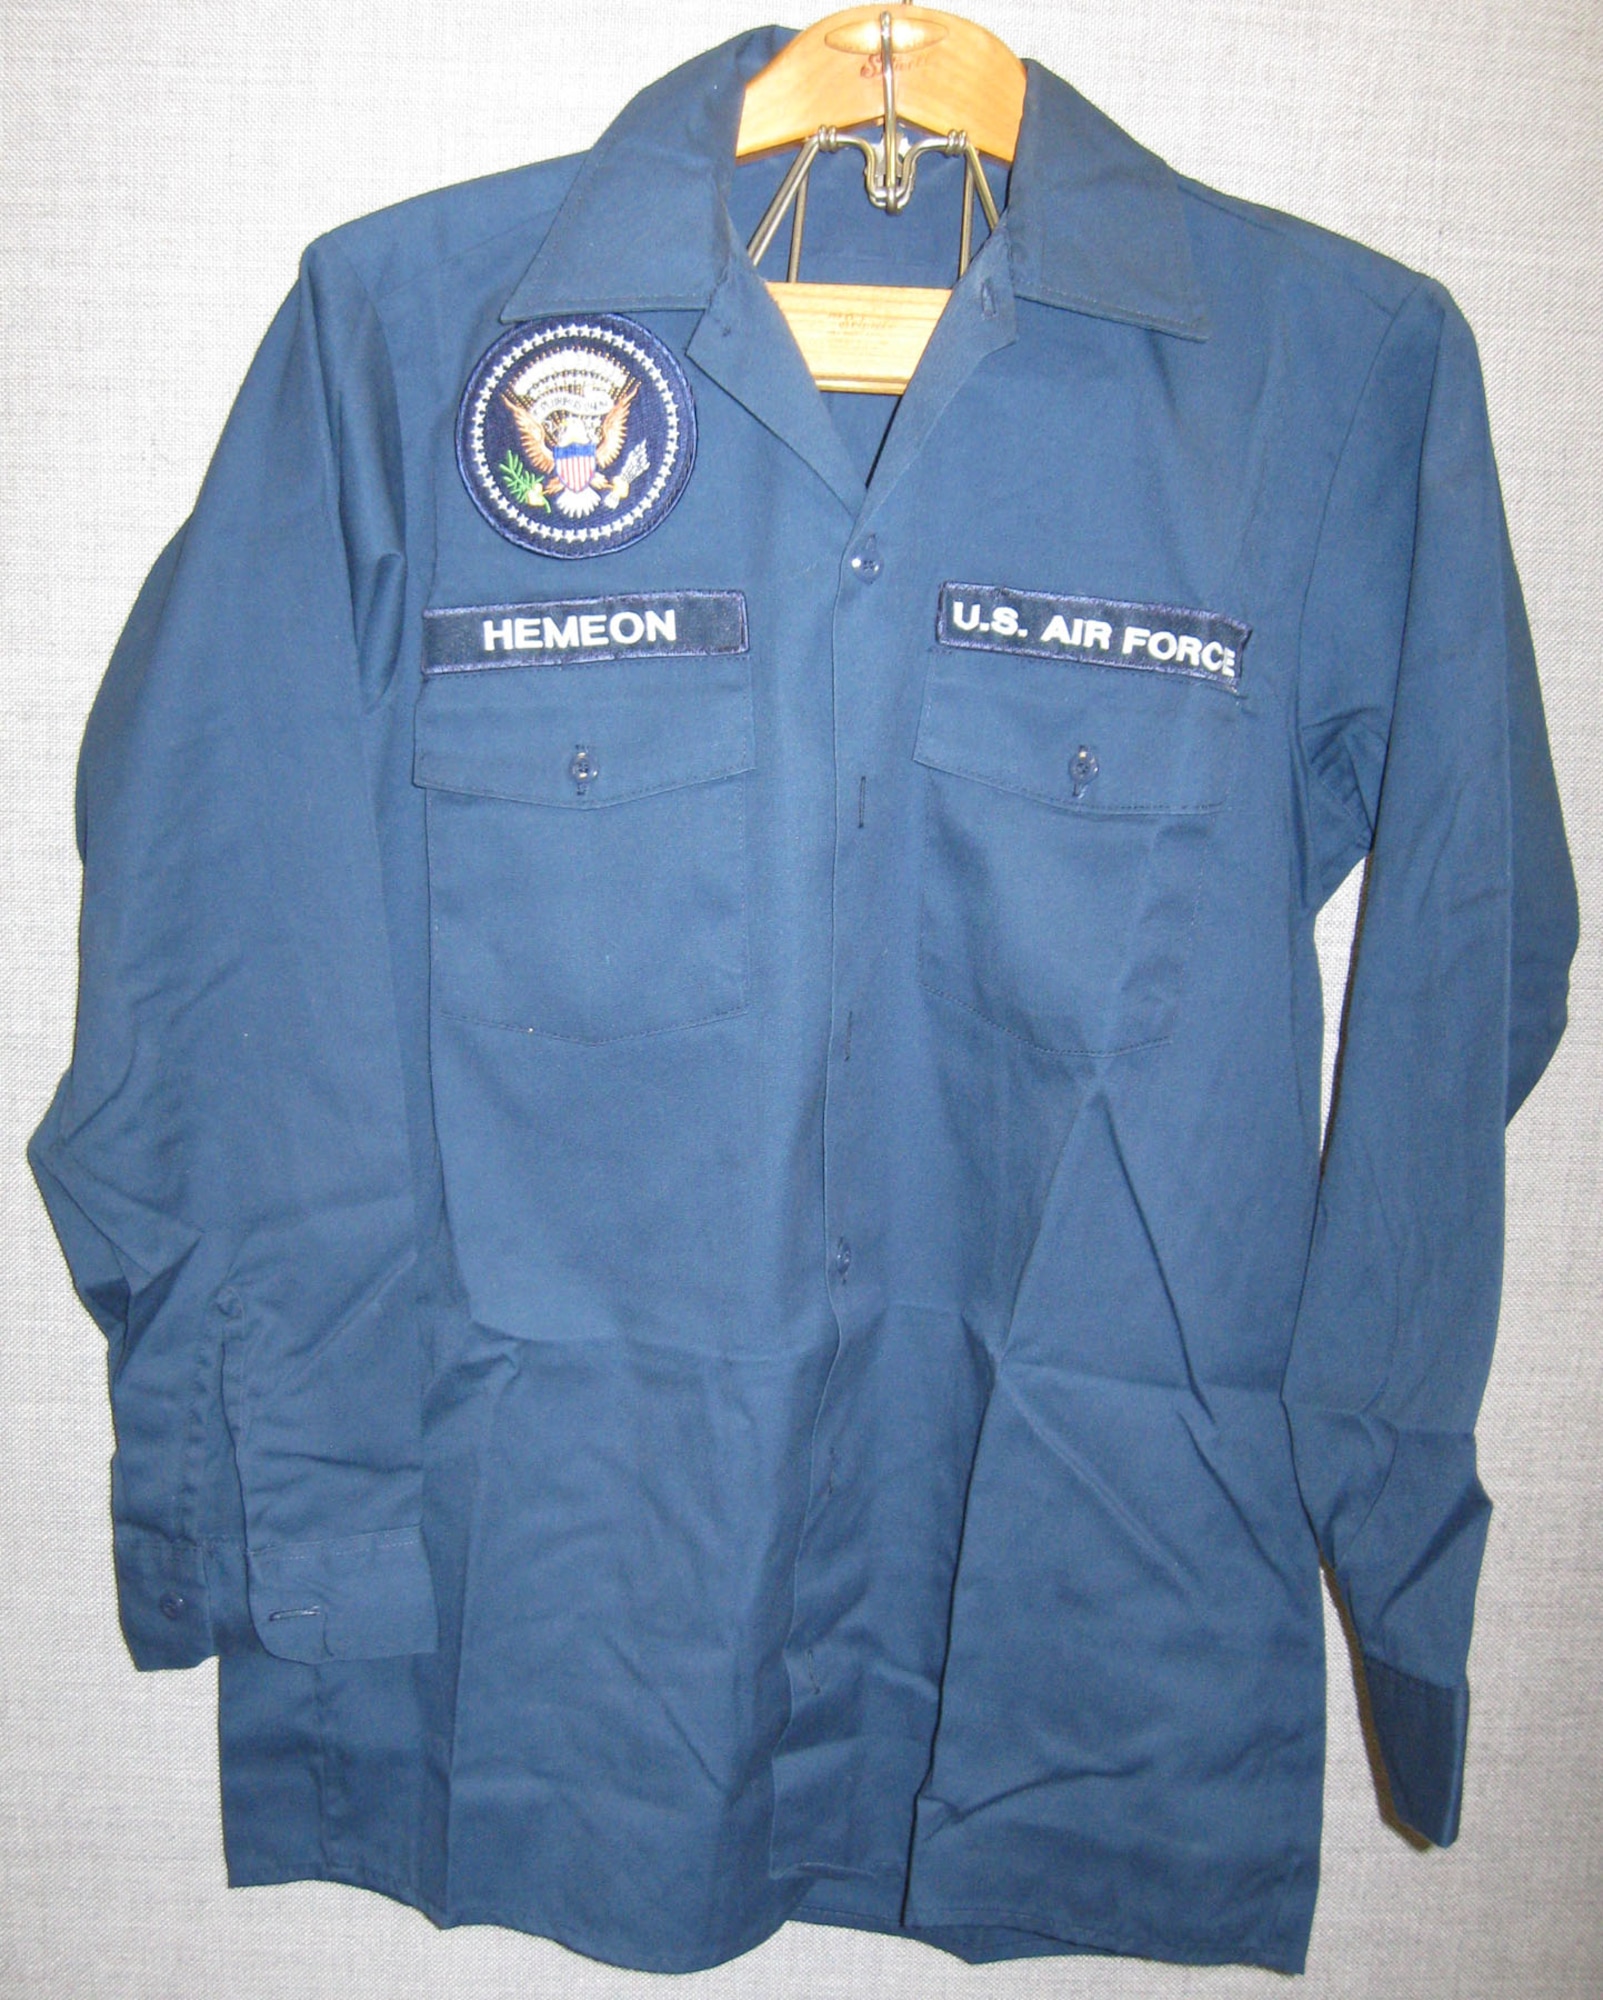 The donor of this blue long-sleeve maintenance shirt served 32 years in the Air Force, retiring on Aug. 1, 2006. He donated this item from his time as chief of maintenance for Air Force One from 1991-1994. (U.S. Air Force photo)